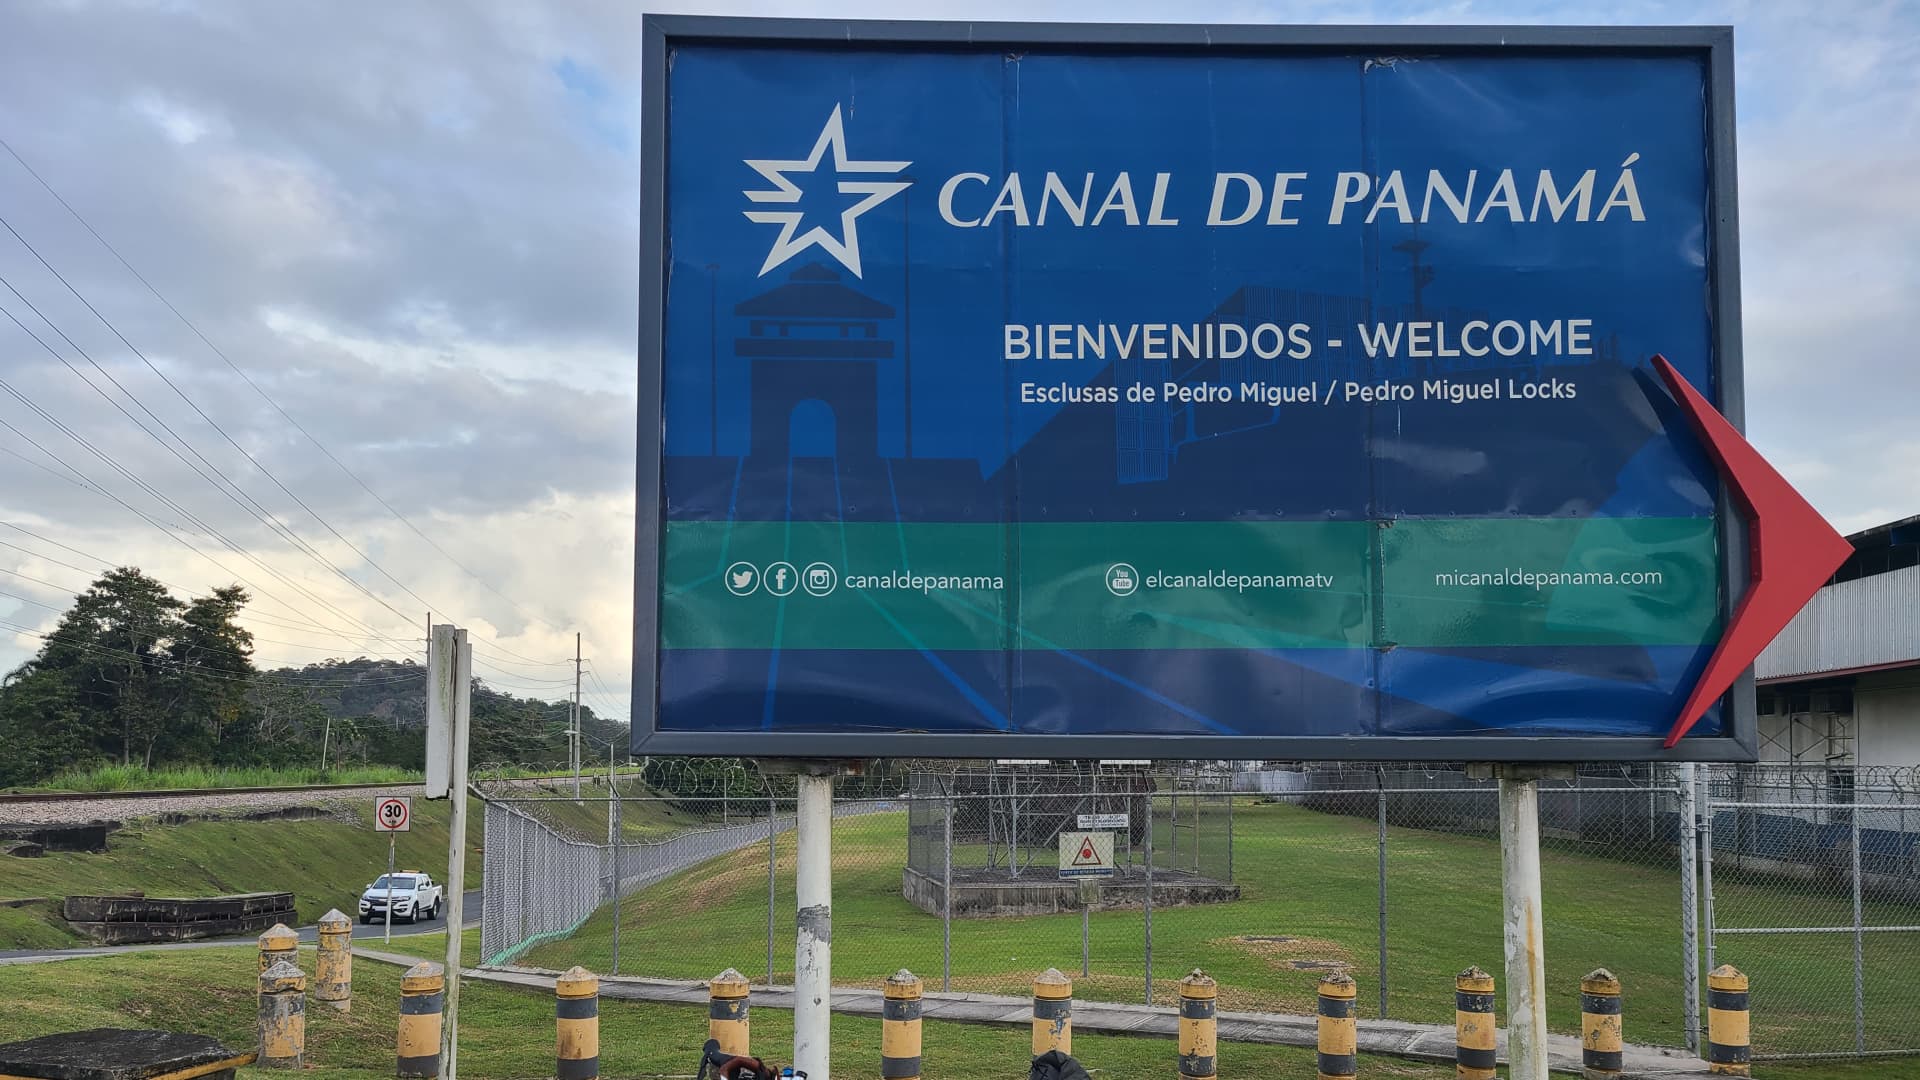 Andrew reaches the Panama Canal